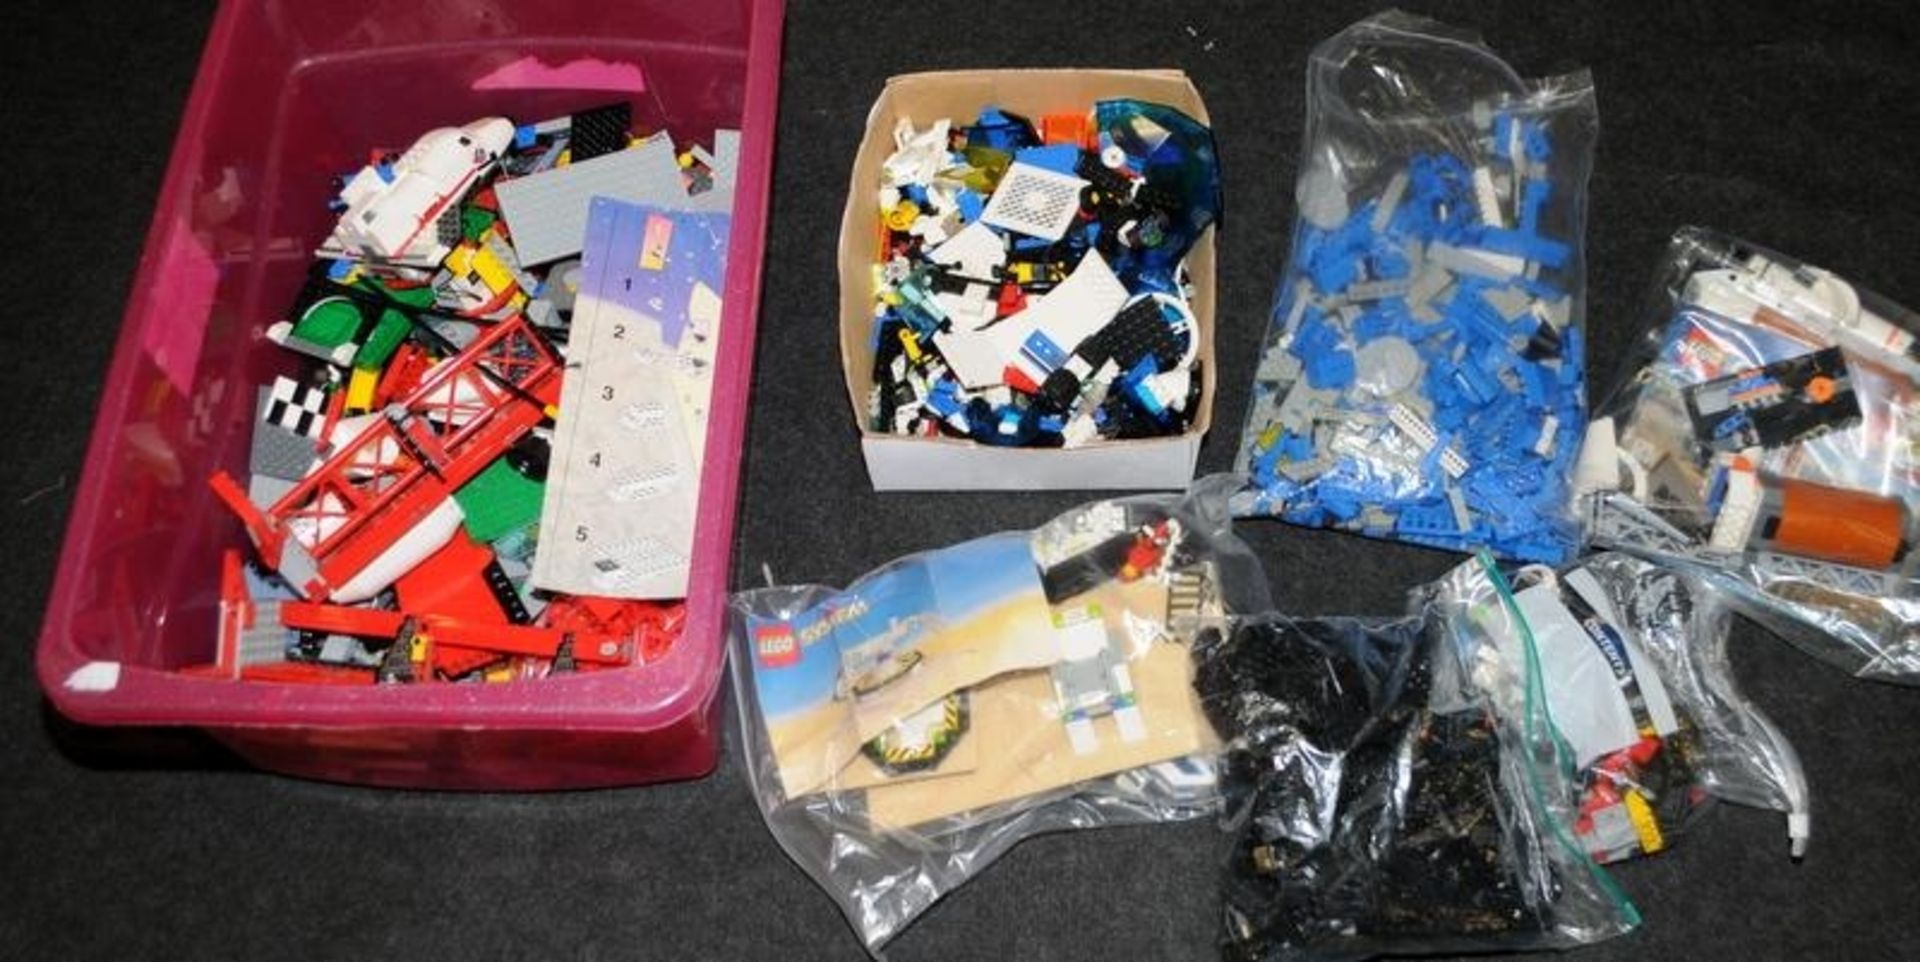 large tub of Lego, various bagged sets and a quantity of loose Lego